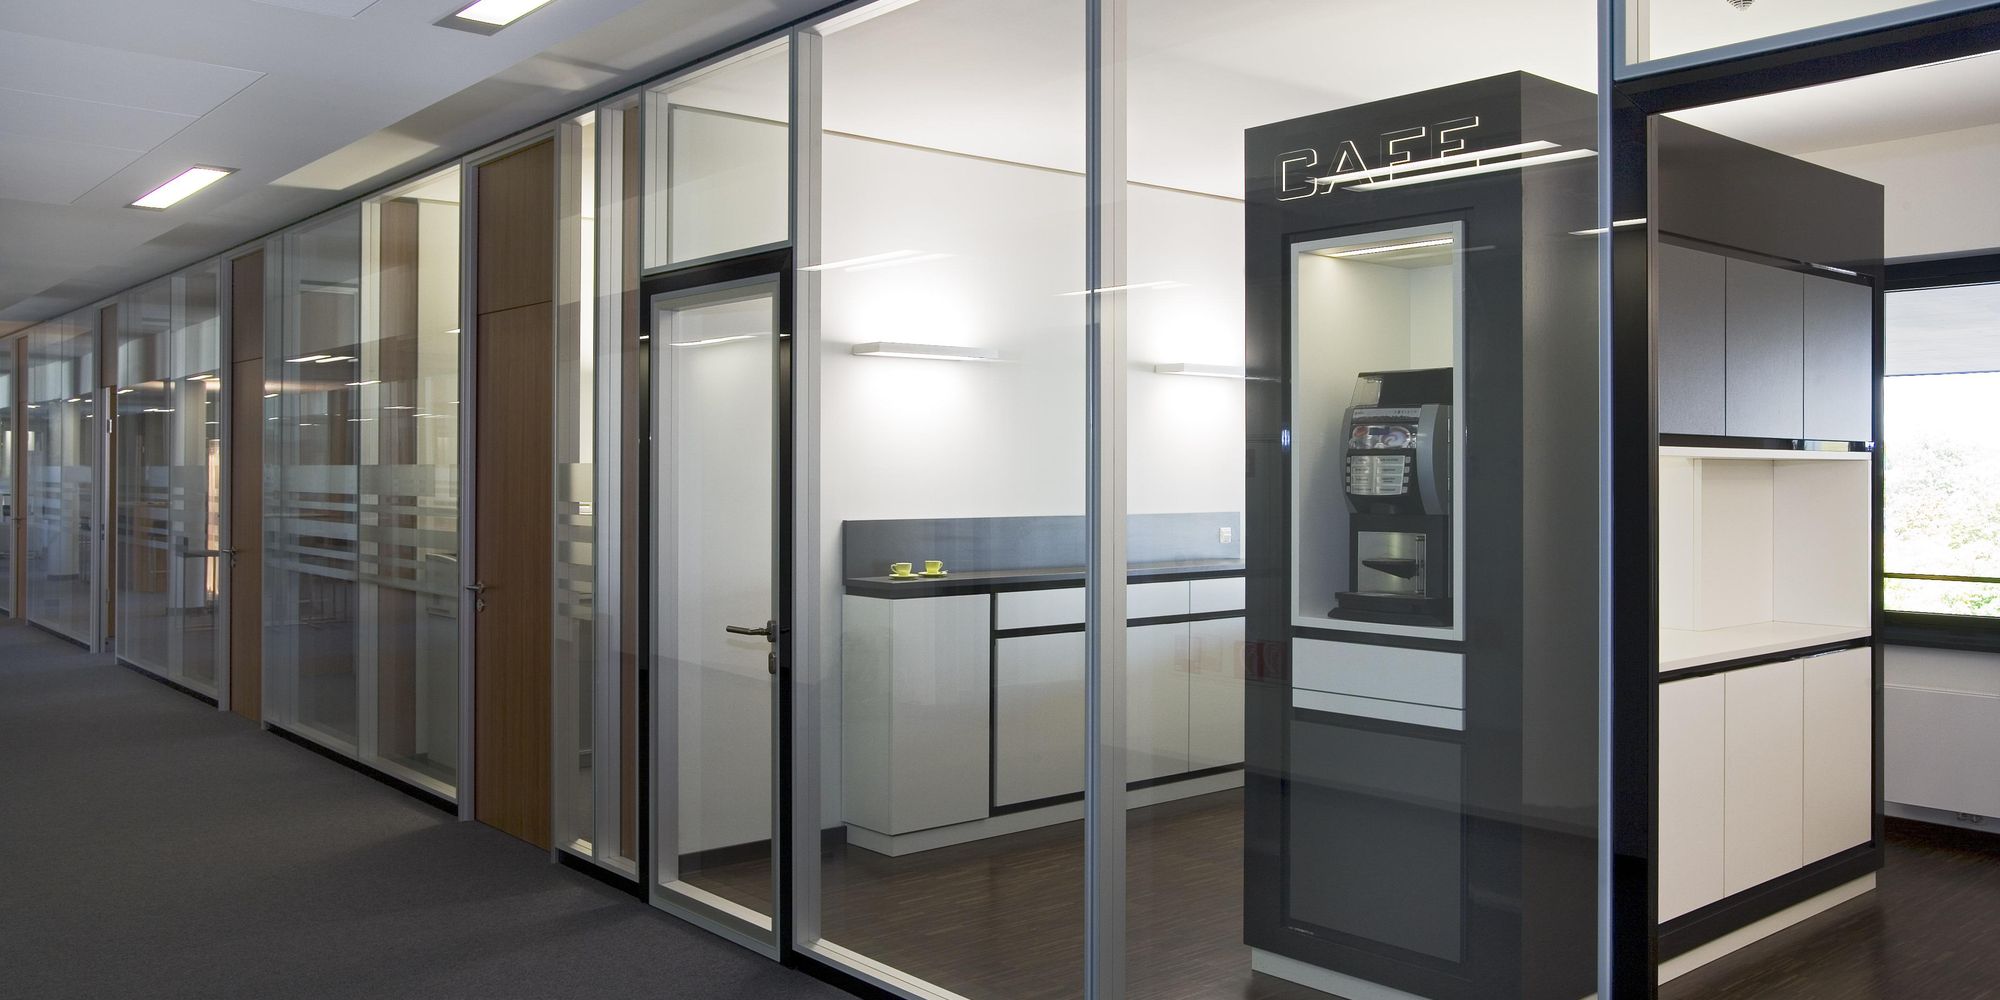 Flush-fit tube frame door with structural glazing in a T65 partition system